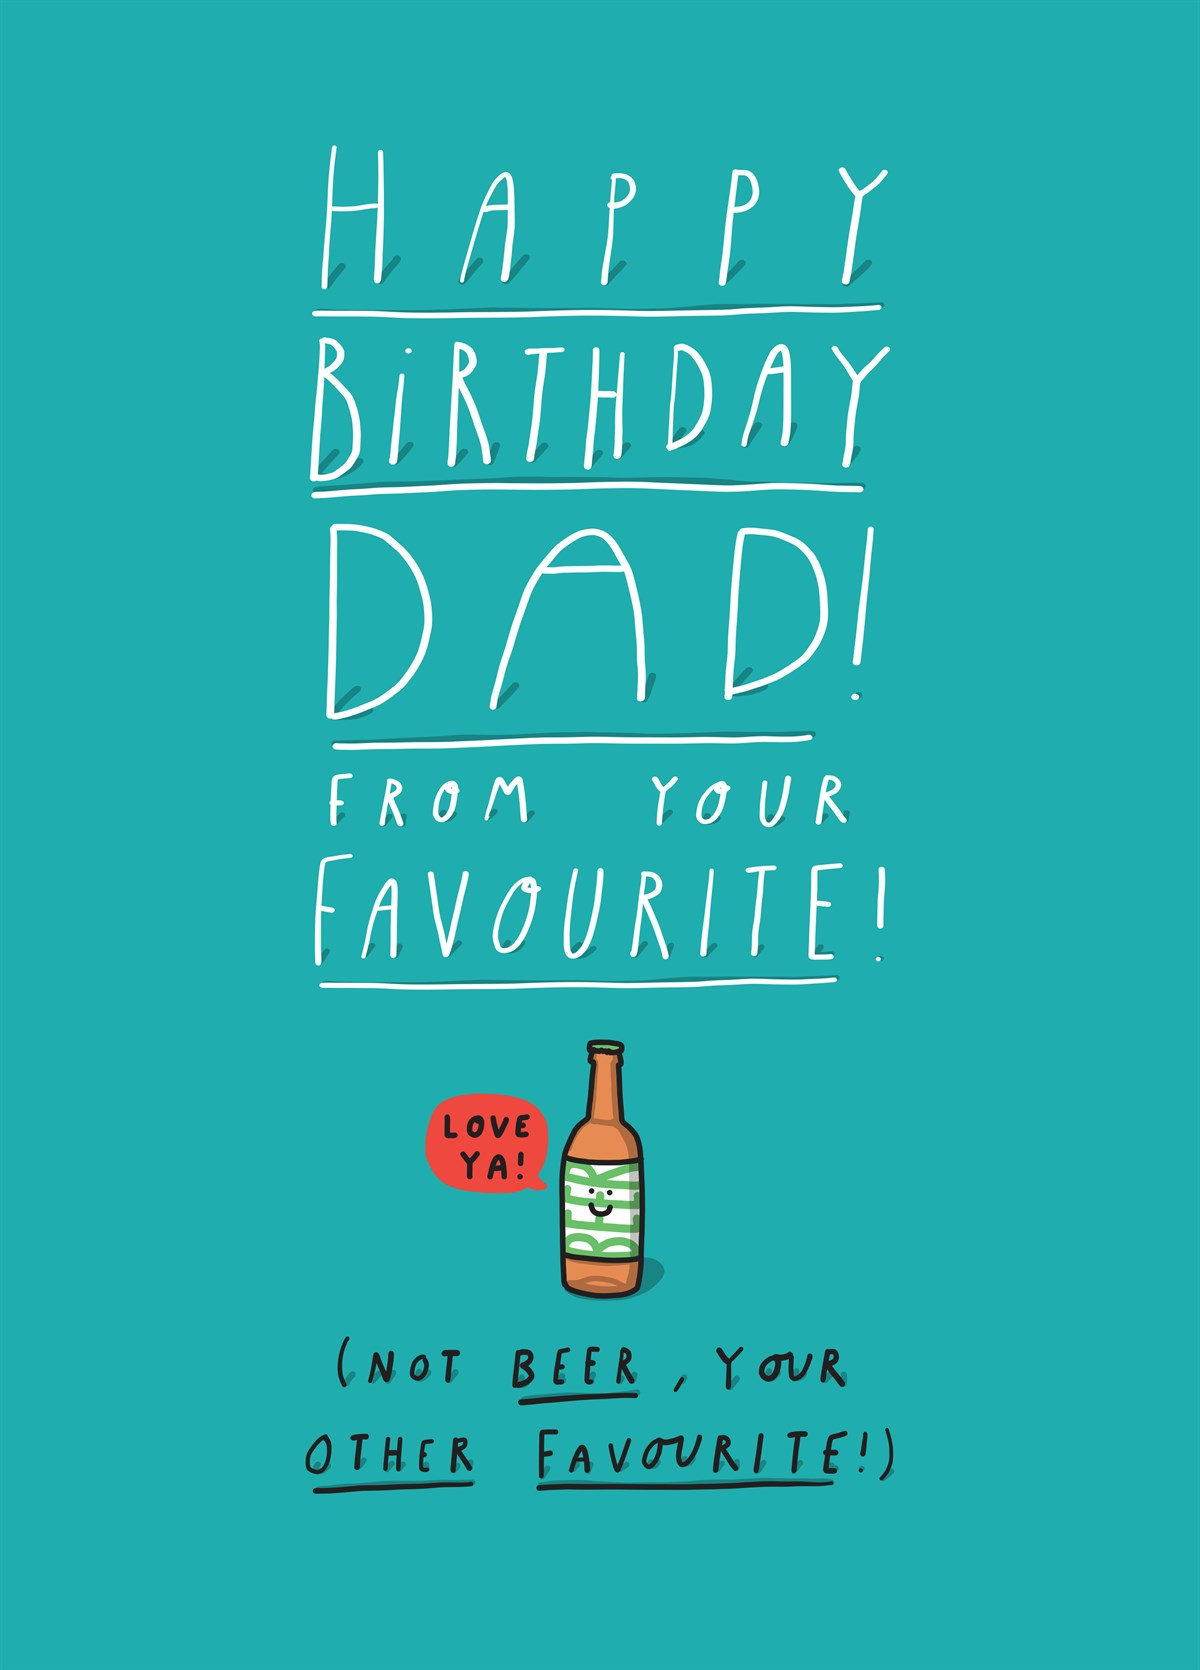 Printable Birthday Cards For Dad Free